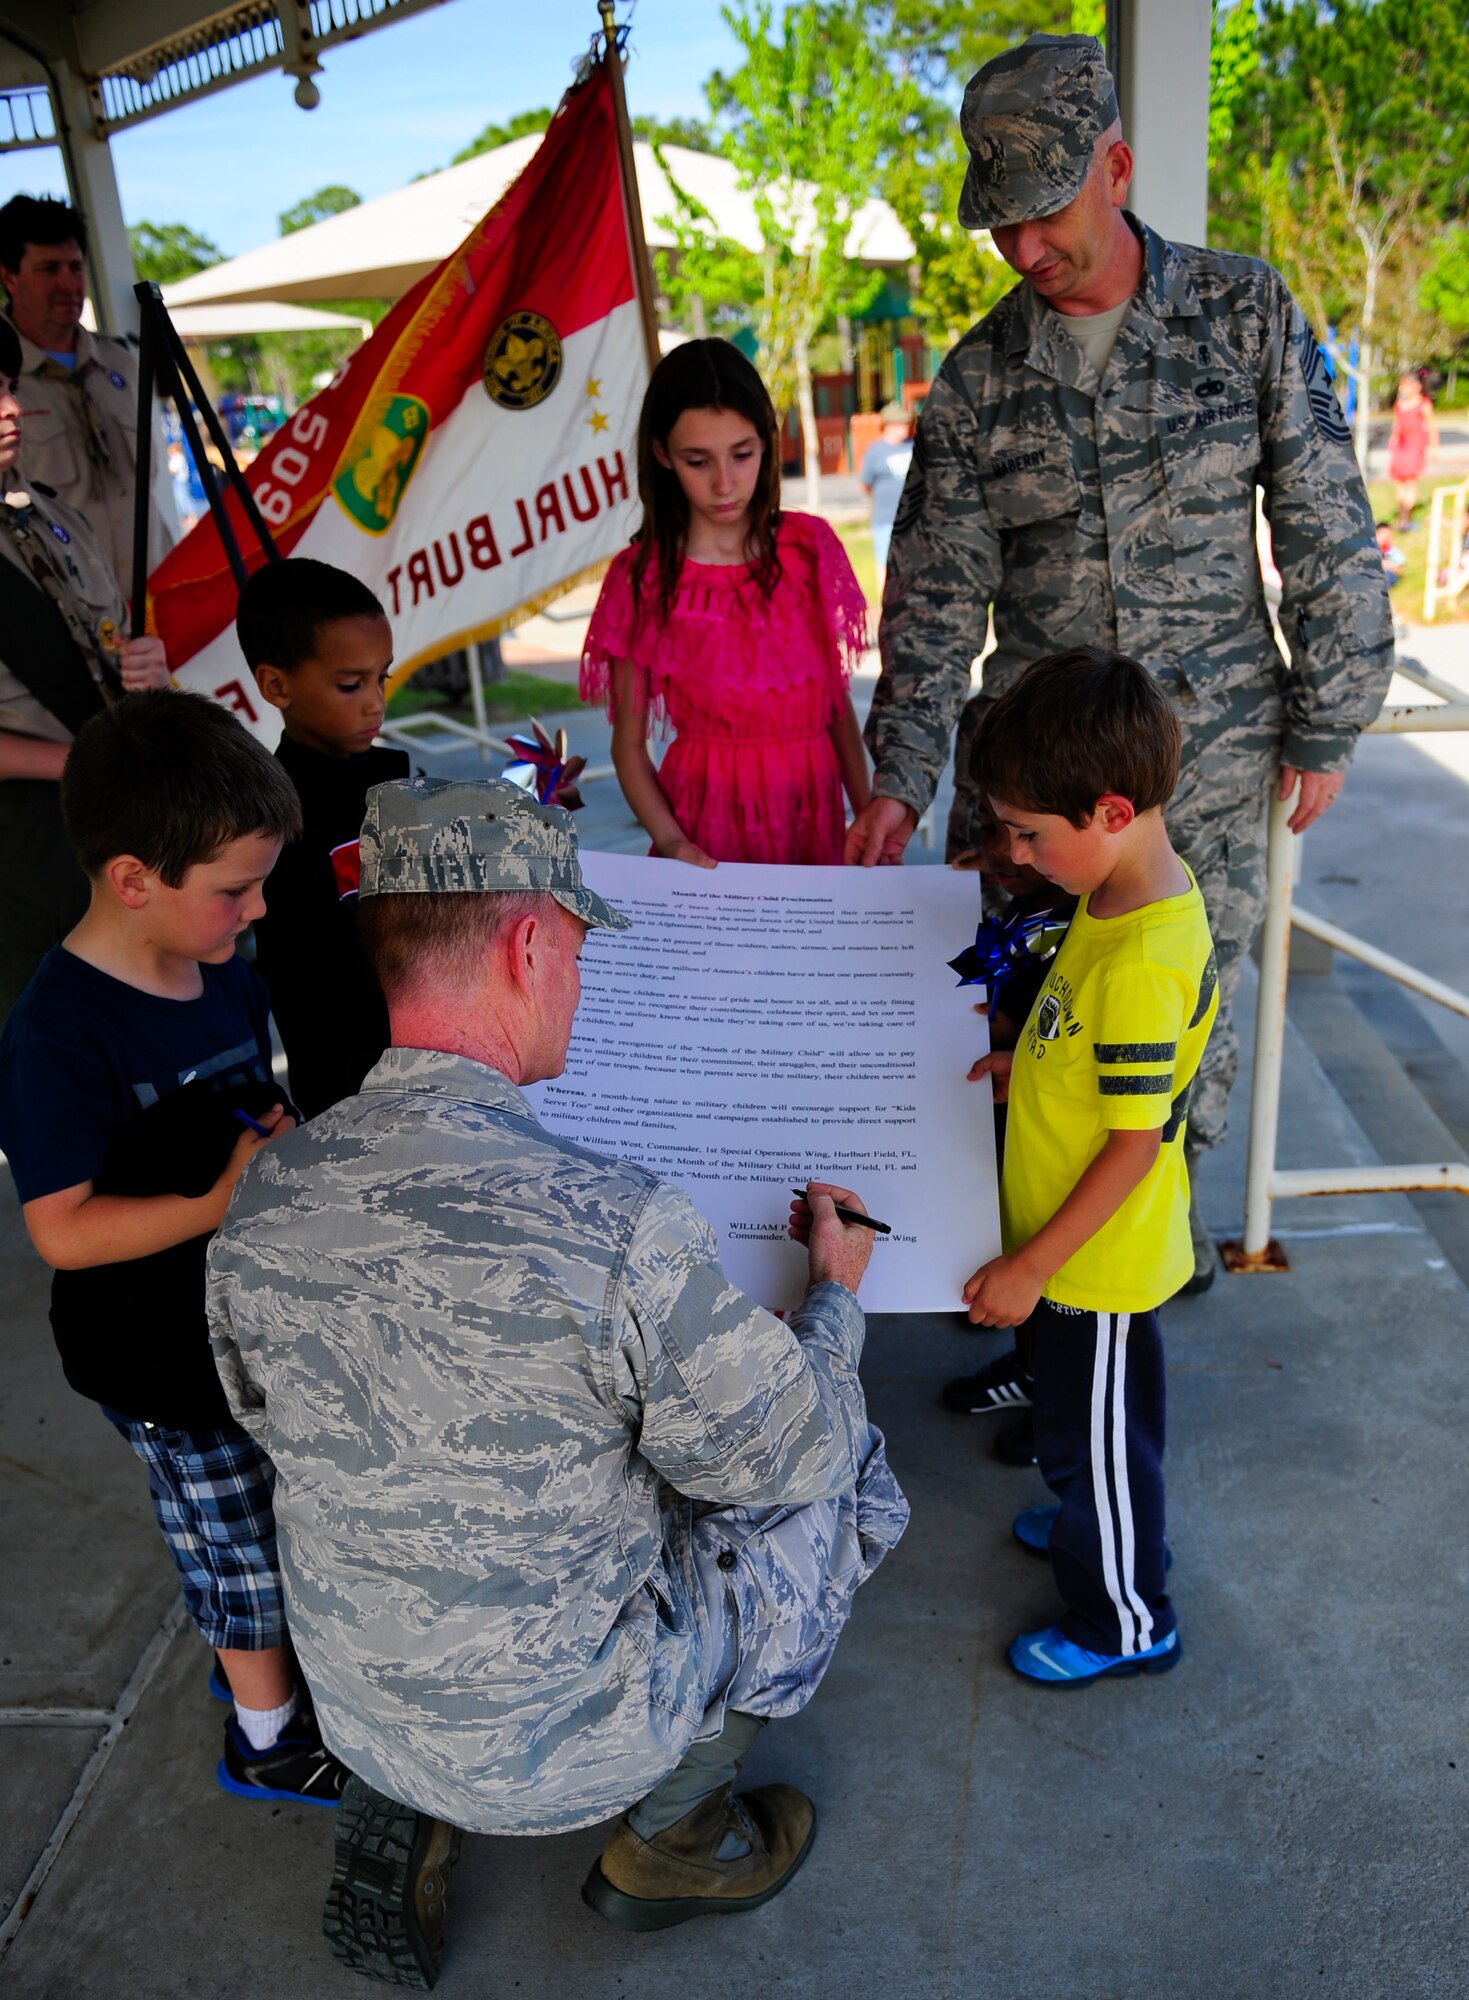 Col. William West, 1st Special Operations Wing commander, signs the proclamation designating April as the month of the military child at the community park on Hurlburt Field, Fla., April 2, 2014. Military children face many challenges such as moving frequently, changing schools, making new friends and deploying parents. (U.S. Air Force photo/Senior Airman Krystal M. Garrett)